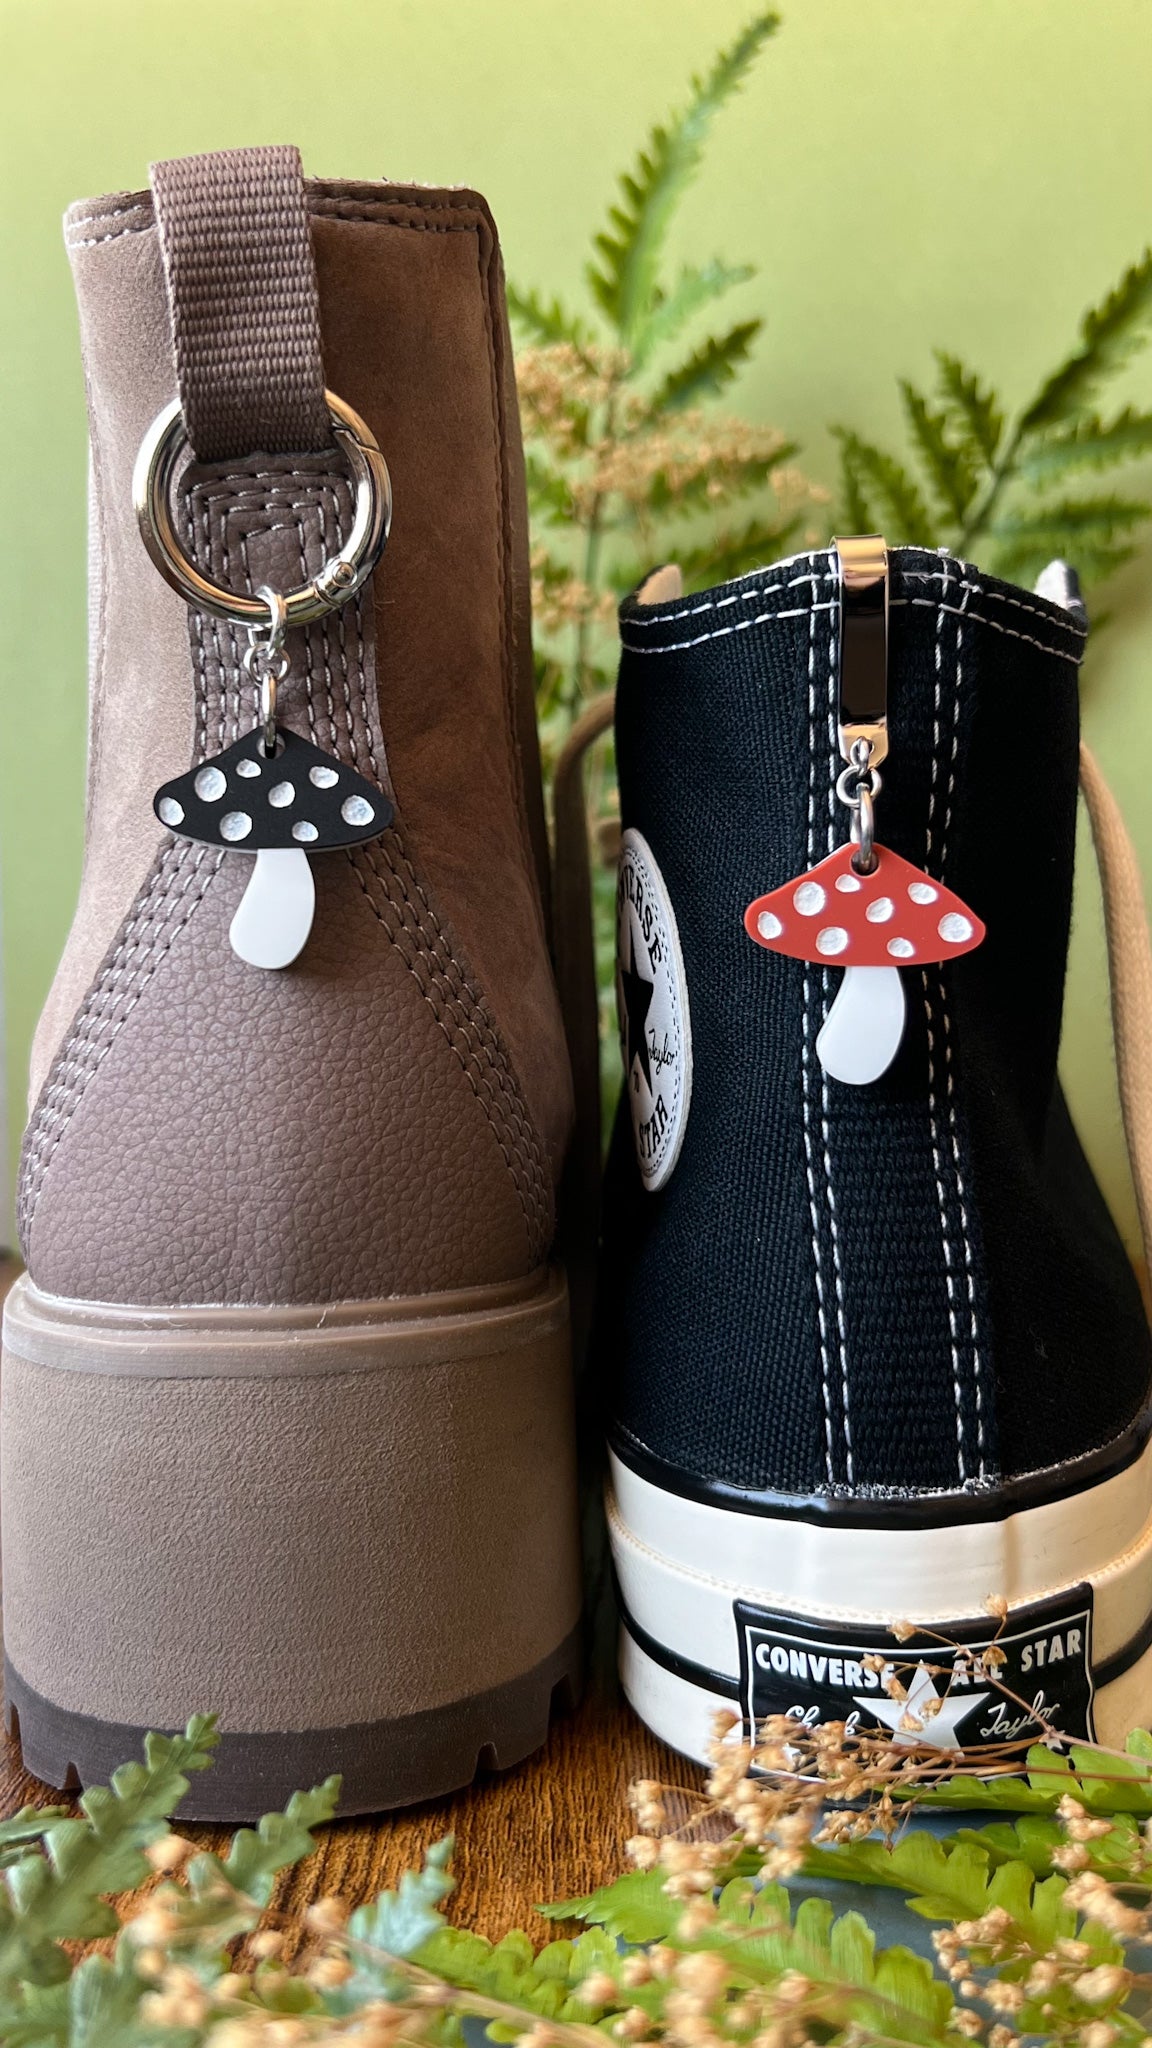 Mushroom Shoe Accessory | Pull Loop, Shoe Charm, High Top Sneaker or Boot Clip, Shoe or Bag Keychain